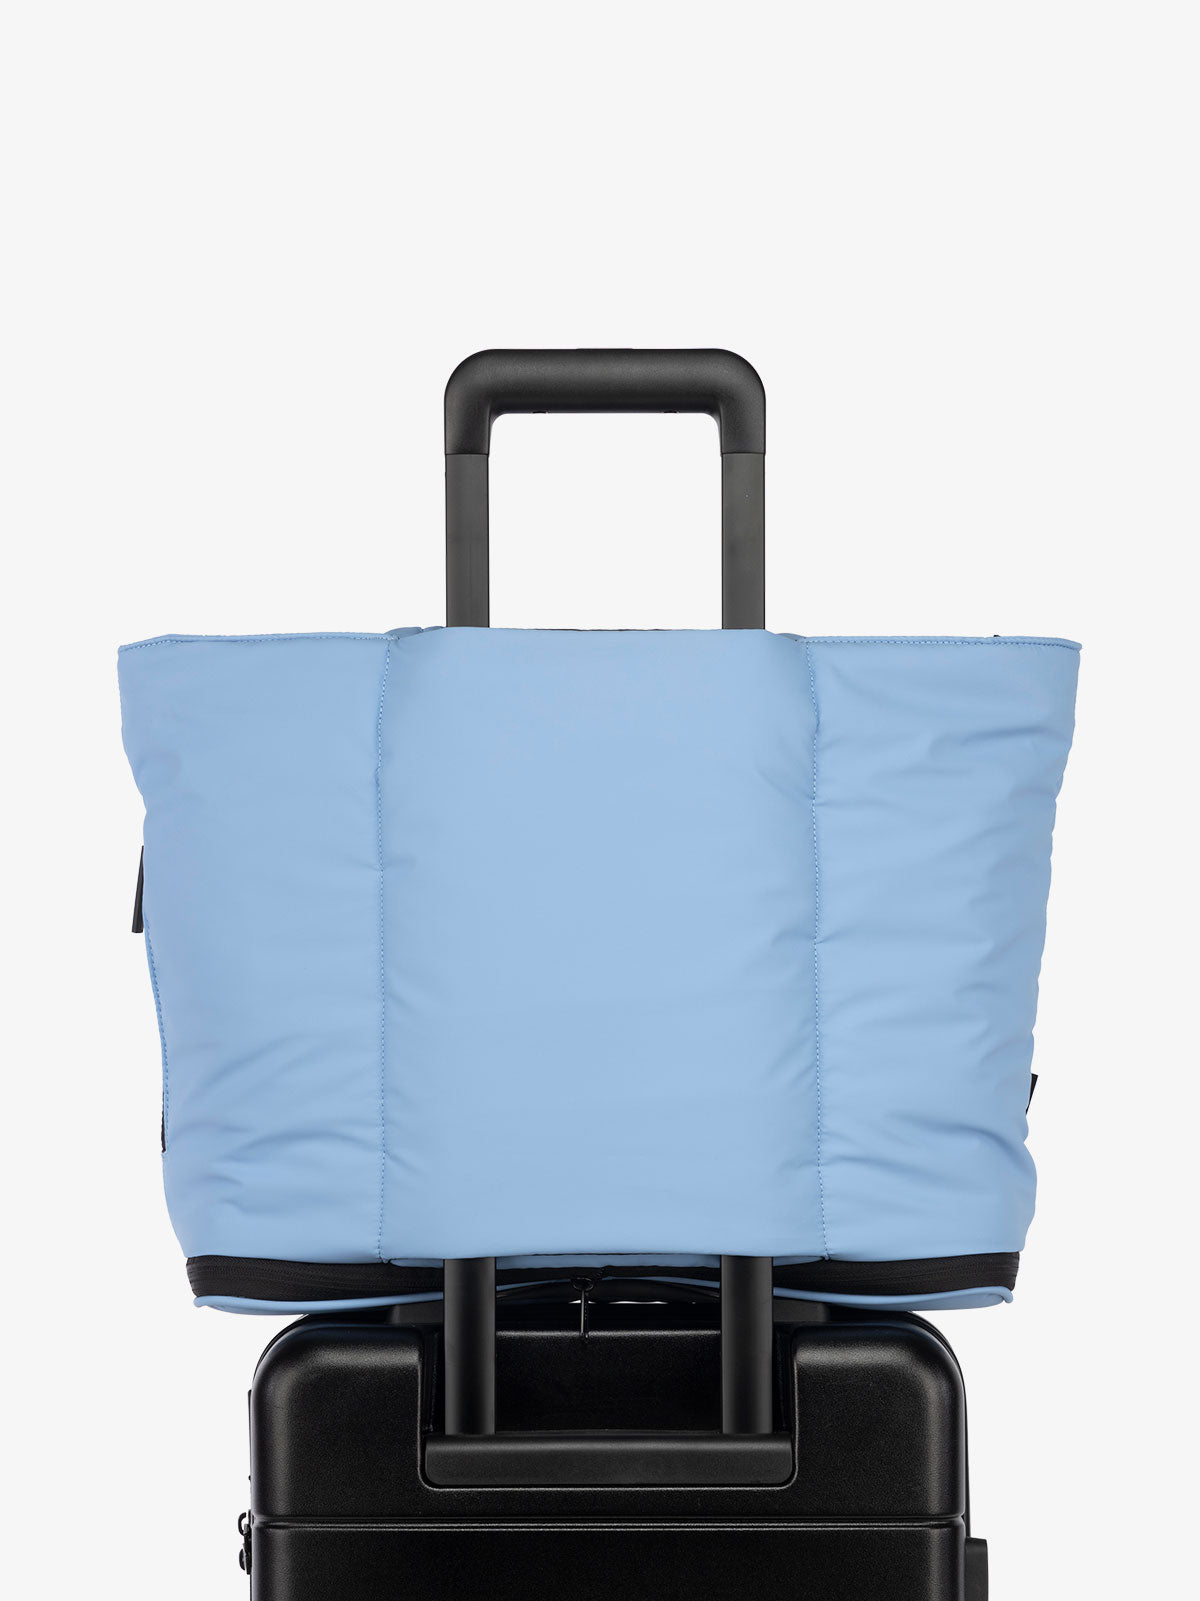 CALPAK Luka expandable travel bag with laptop compartment and trolley sleeve in winter sky blue